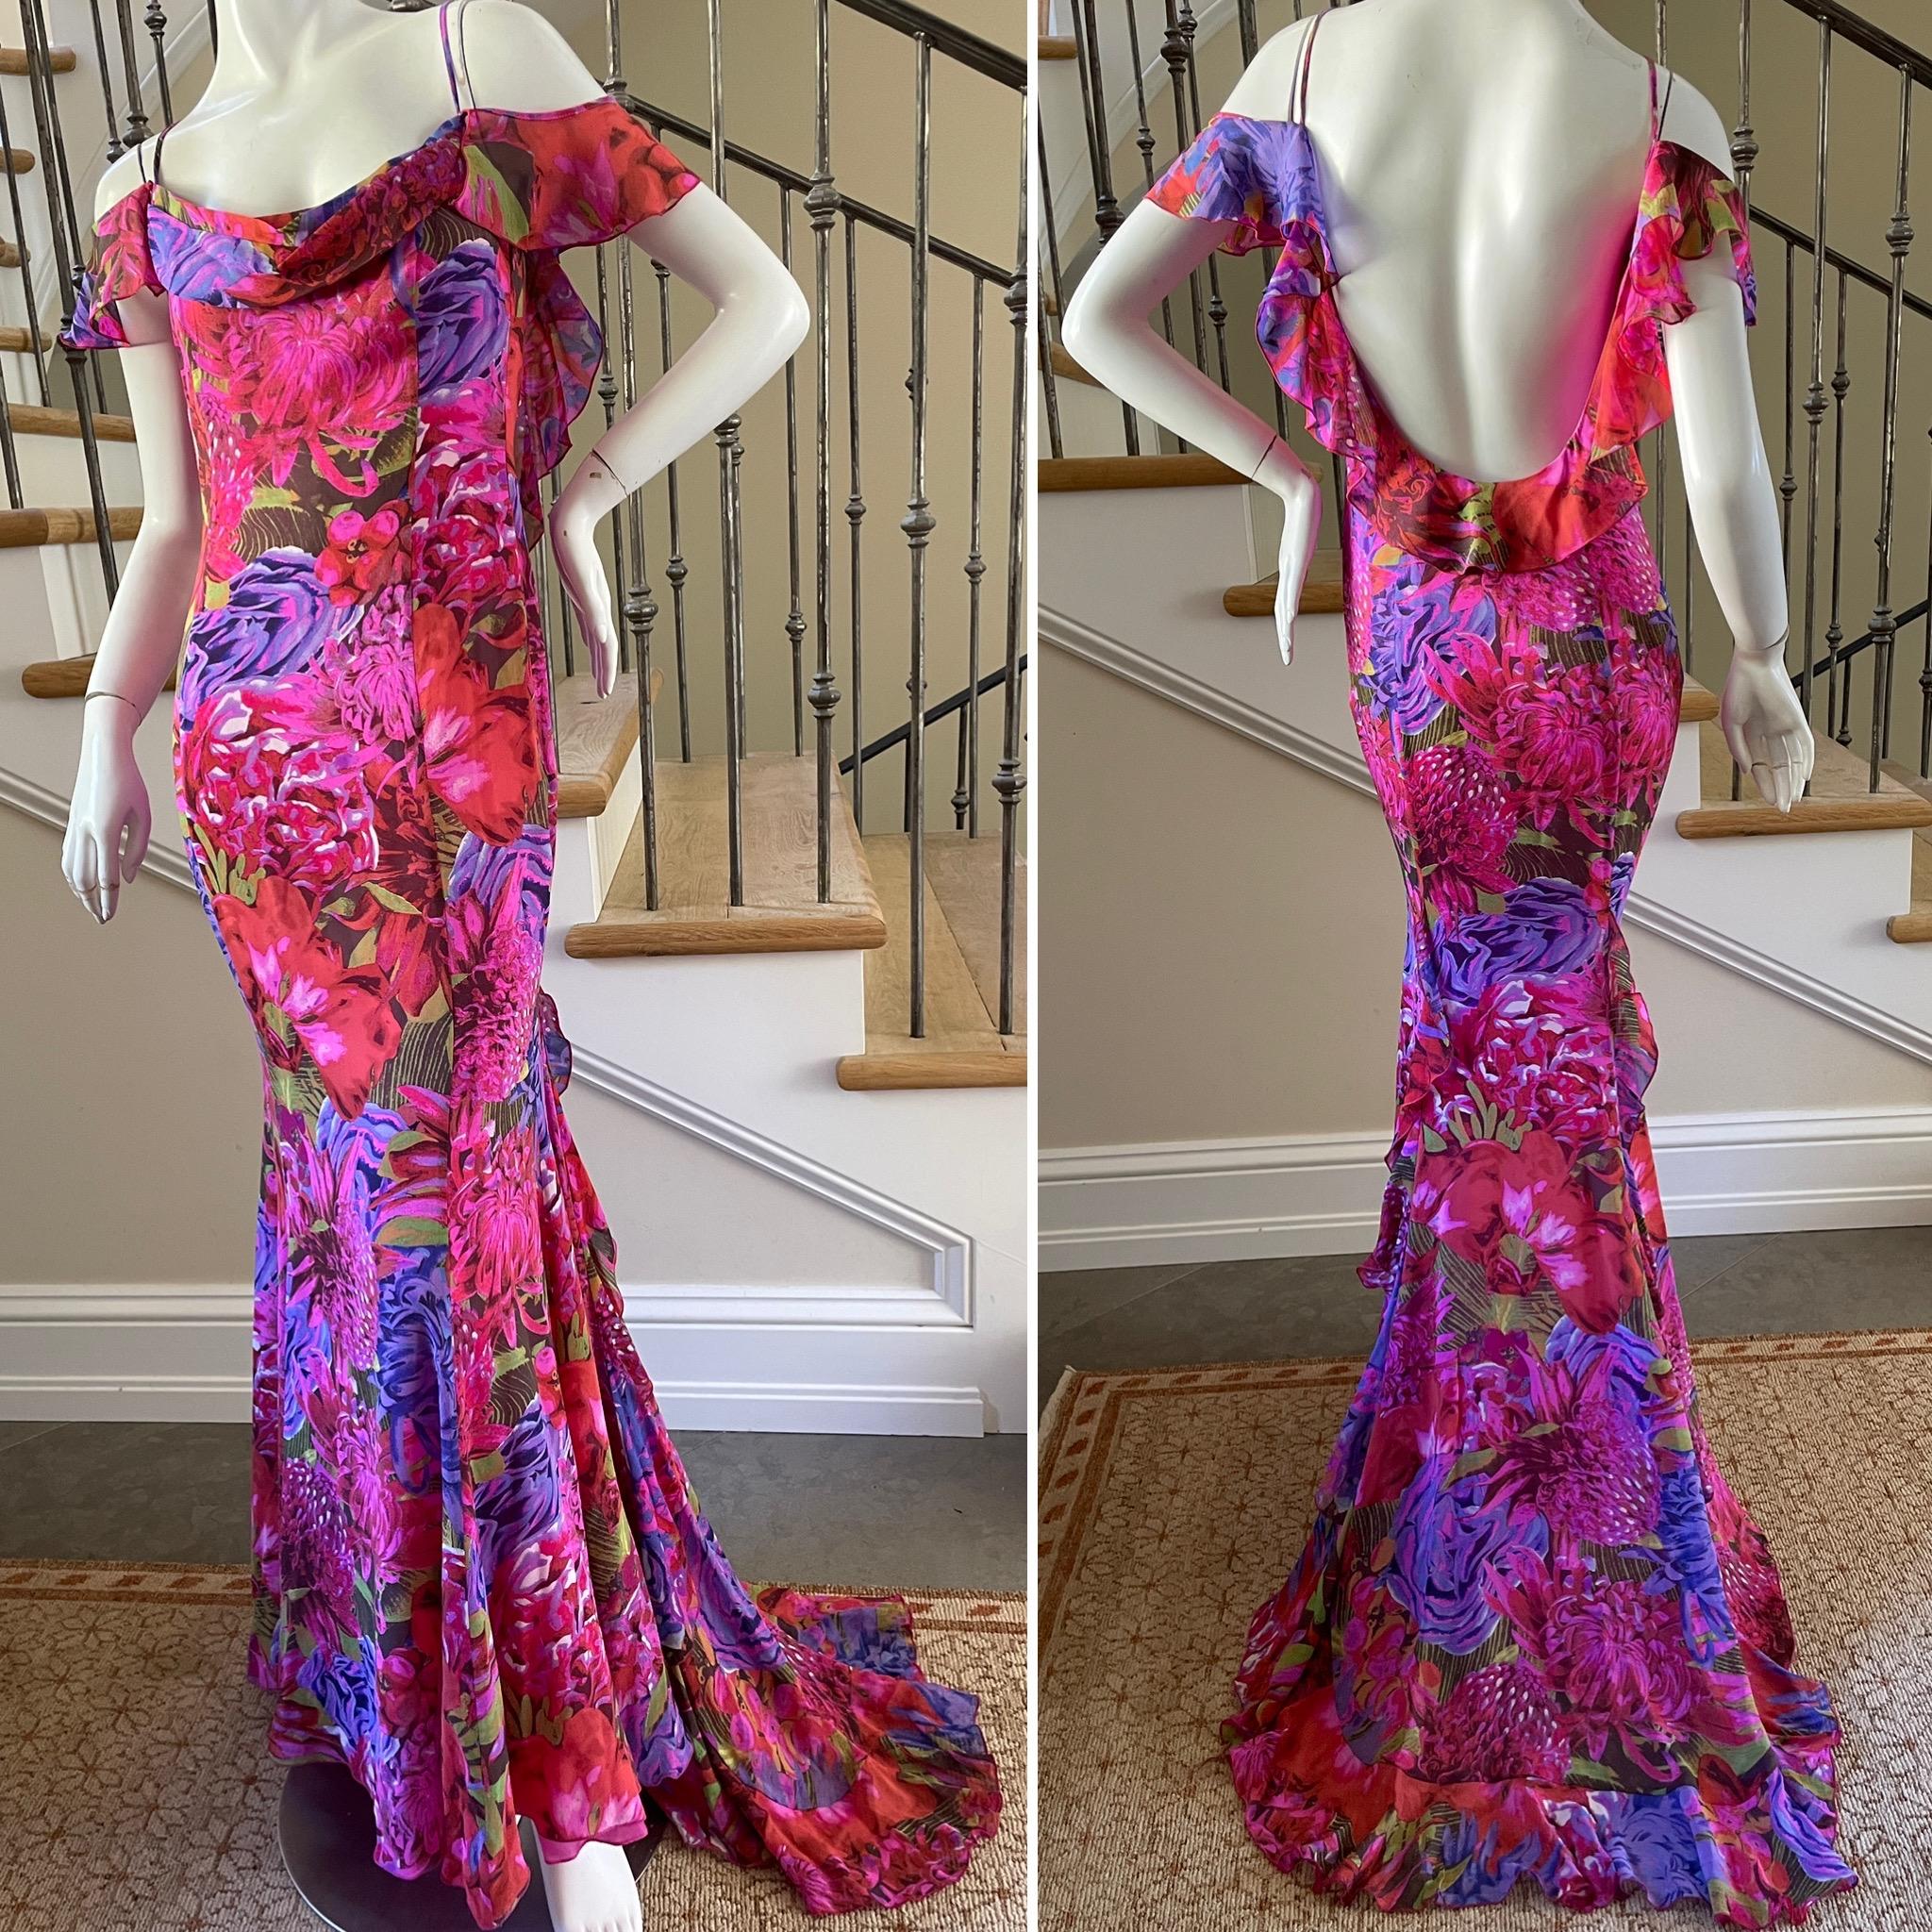 Escada Vintage Backless Silk Floral Print Ruffled Evening Dress with Train.
This is so pretty, with cold shoulders.
 Size 38
 Bust 35